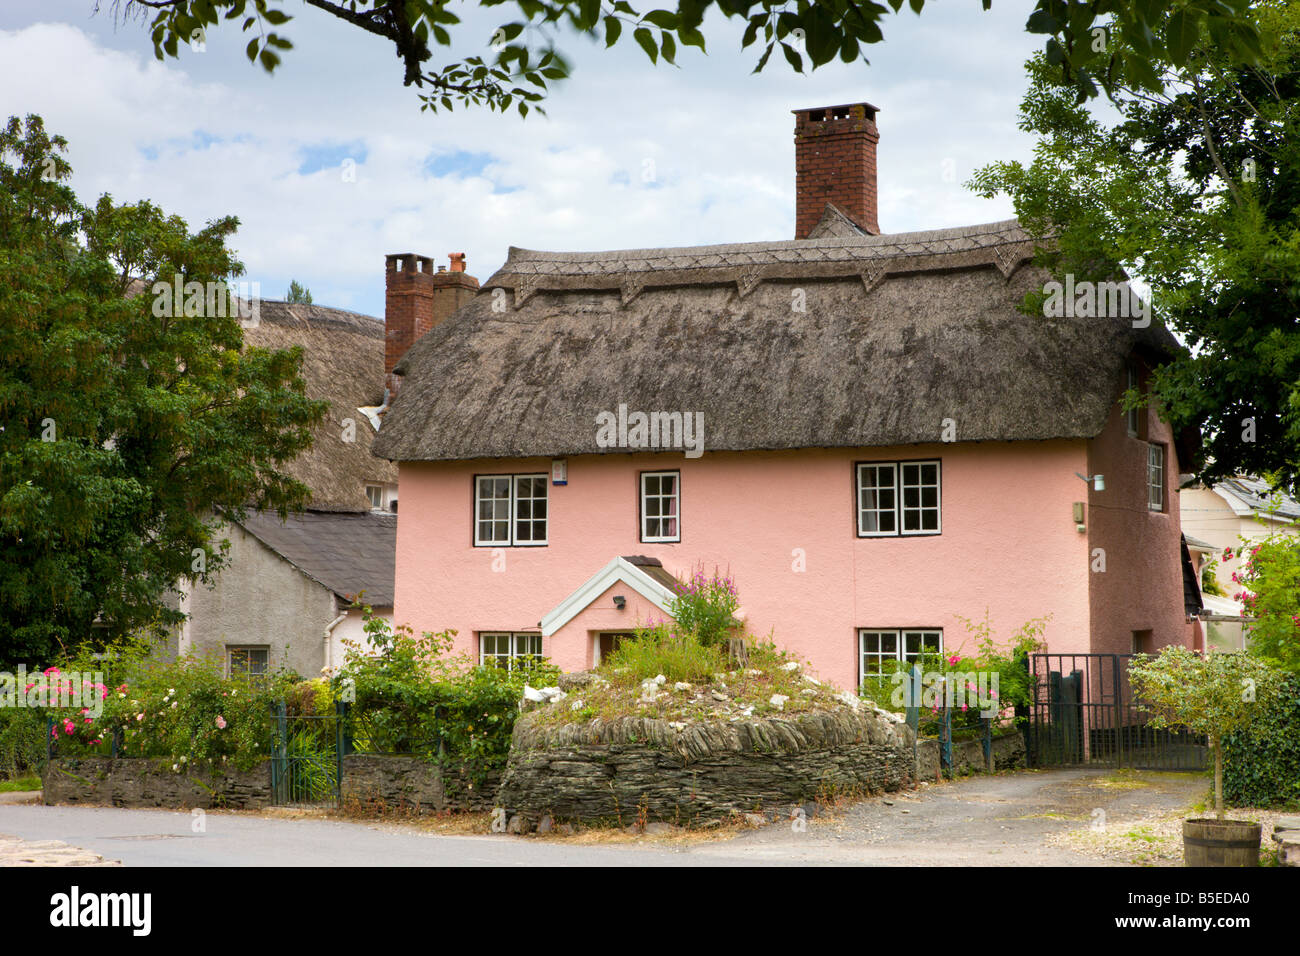 Picturesque thatched cottage in the village of Winsford, Exmoor National Park Somerset England Stock Photo